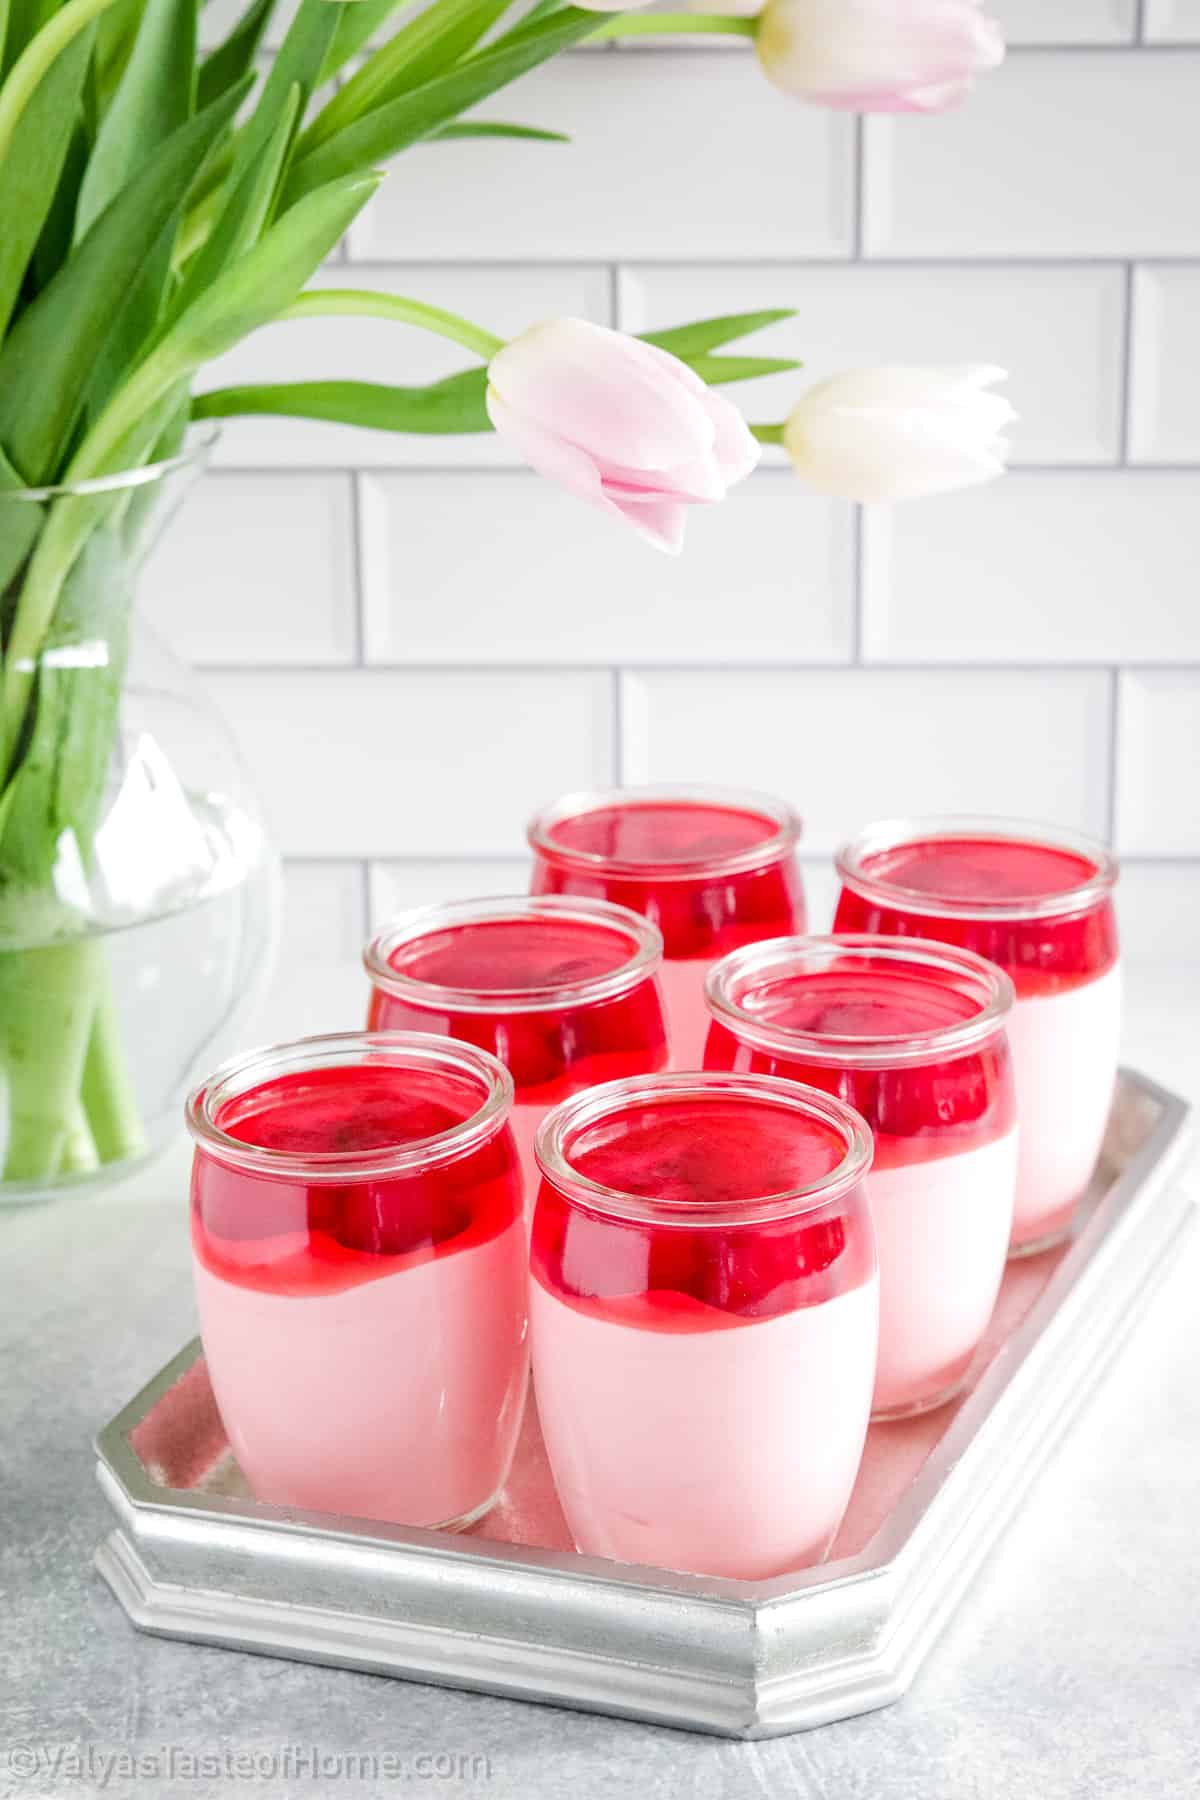 Jello mousse is a delicious and easy-to-make dessert that is sure to please everyone.